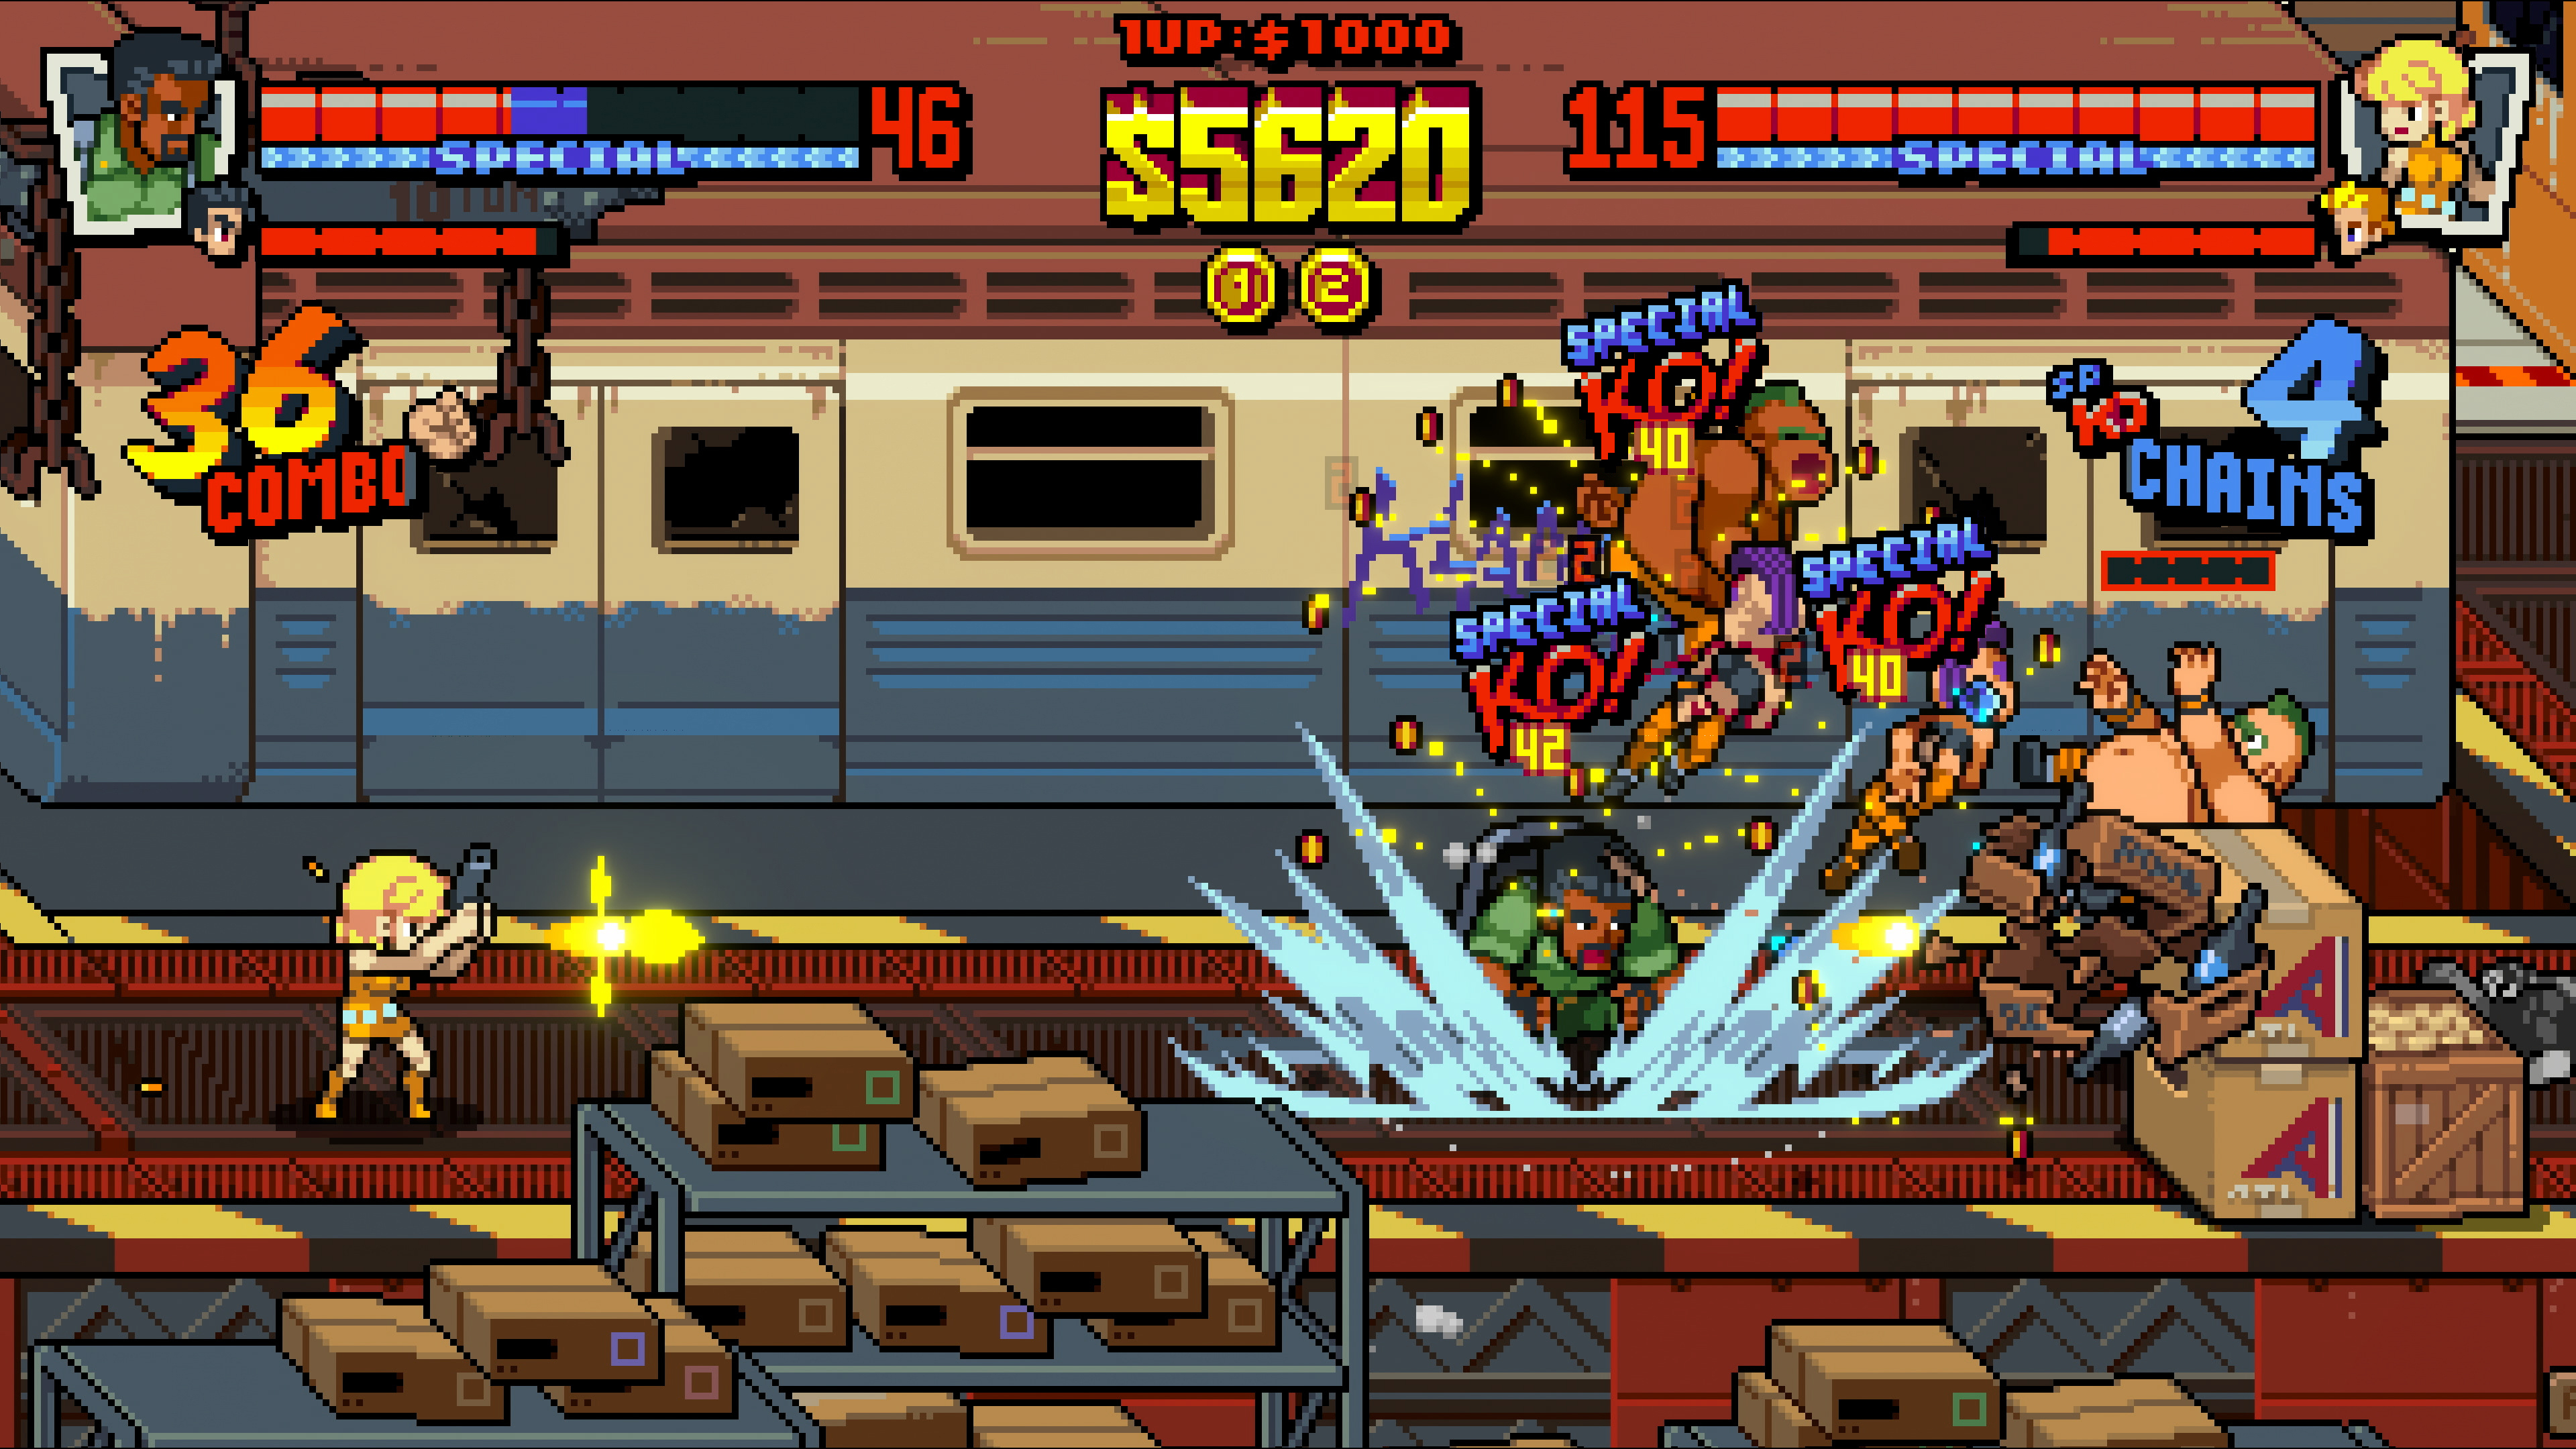 Co-Optimus - Screens - 3D Double Dragon II Remake Coming to XBLA as Wander  of the Dragons